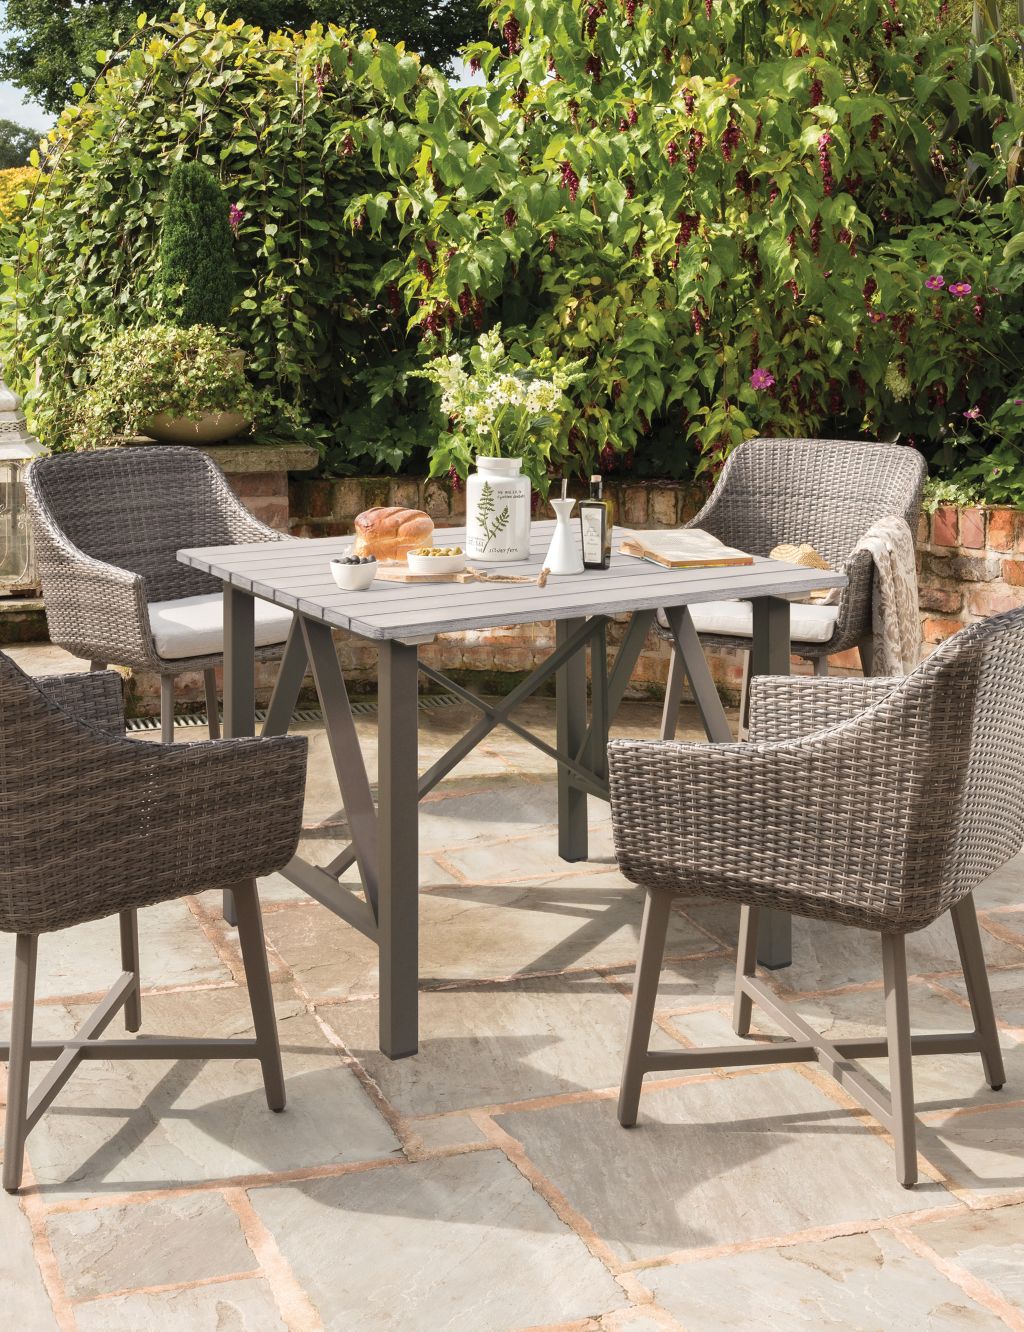 LaMode 4 Seater Garden Table & Chairs image 1